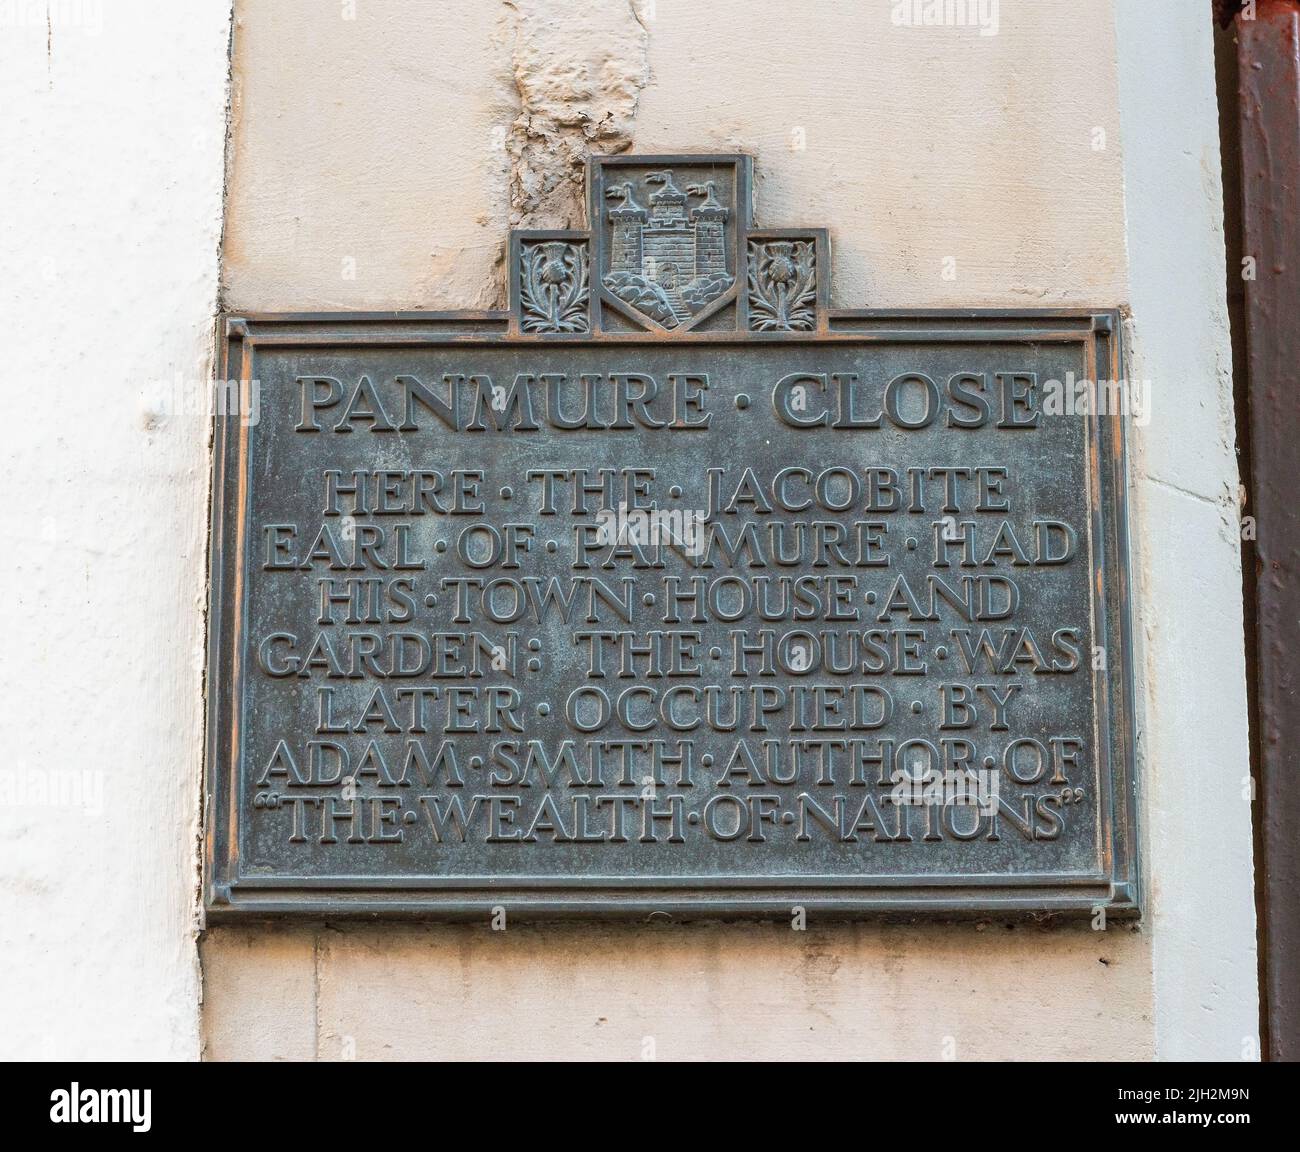 Information on Panmure Close in the old town of Edinburgh, Scotland Stock Photo